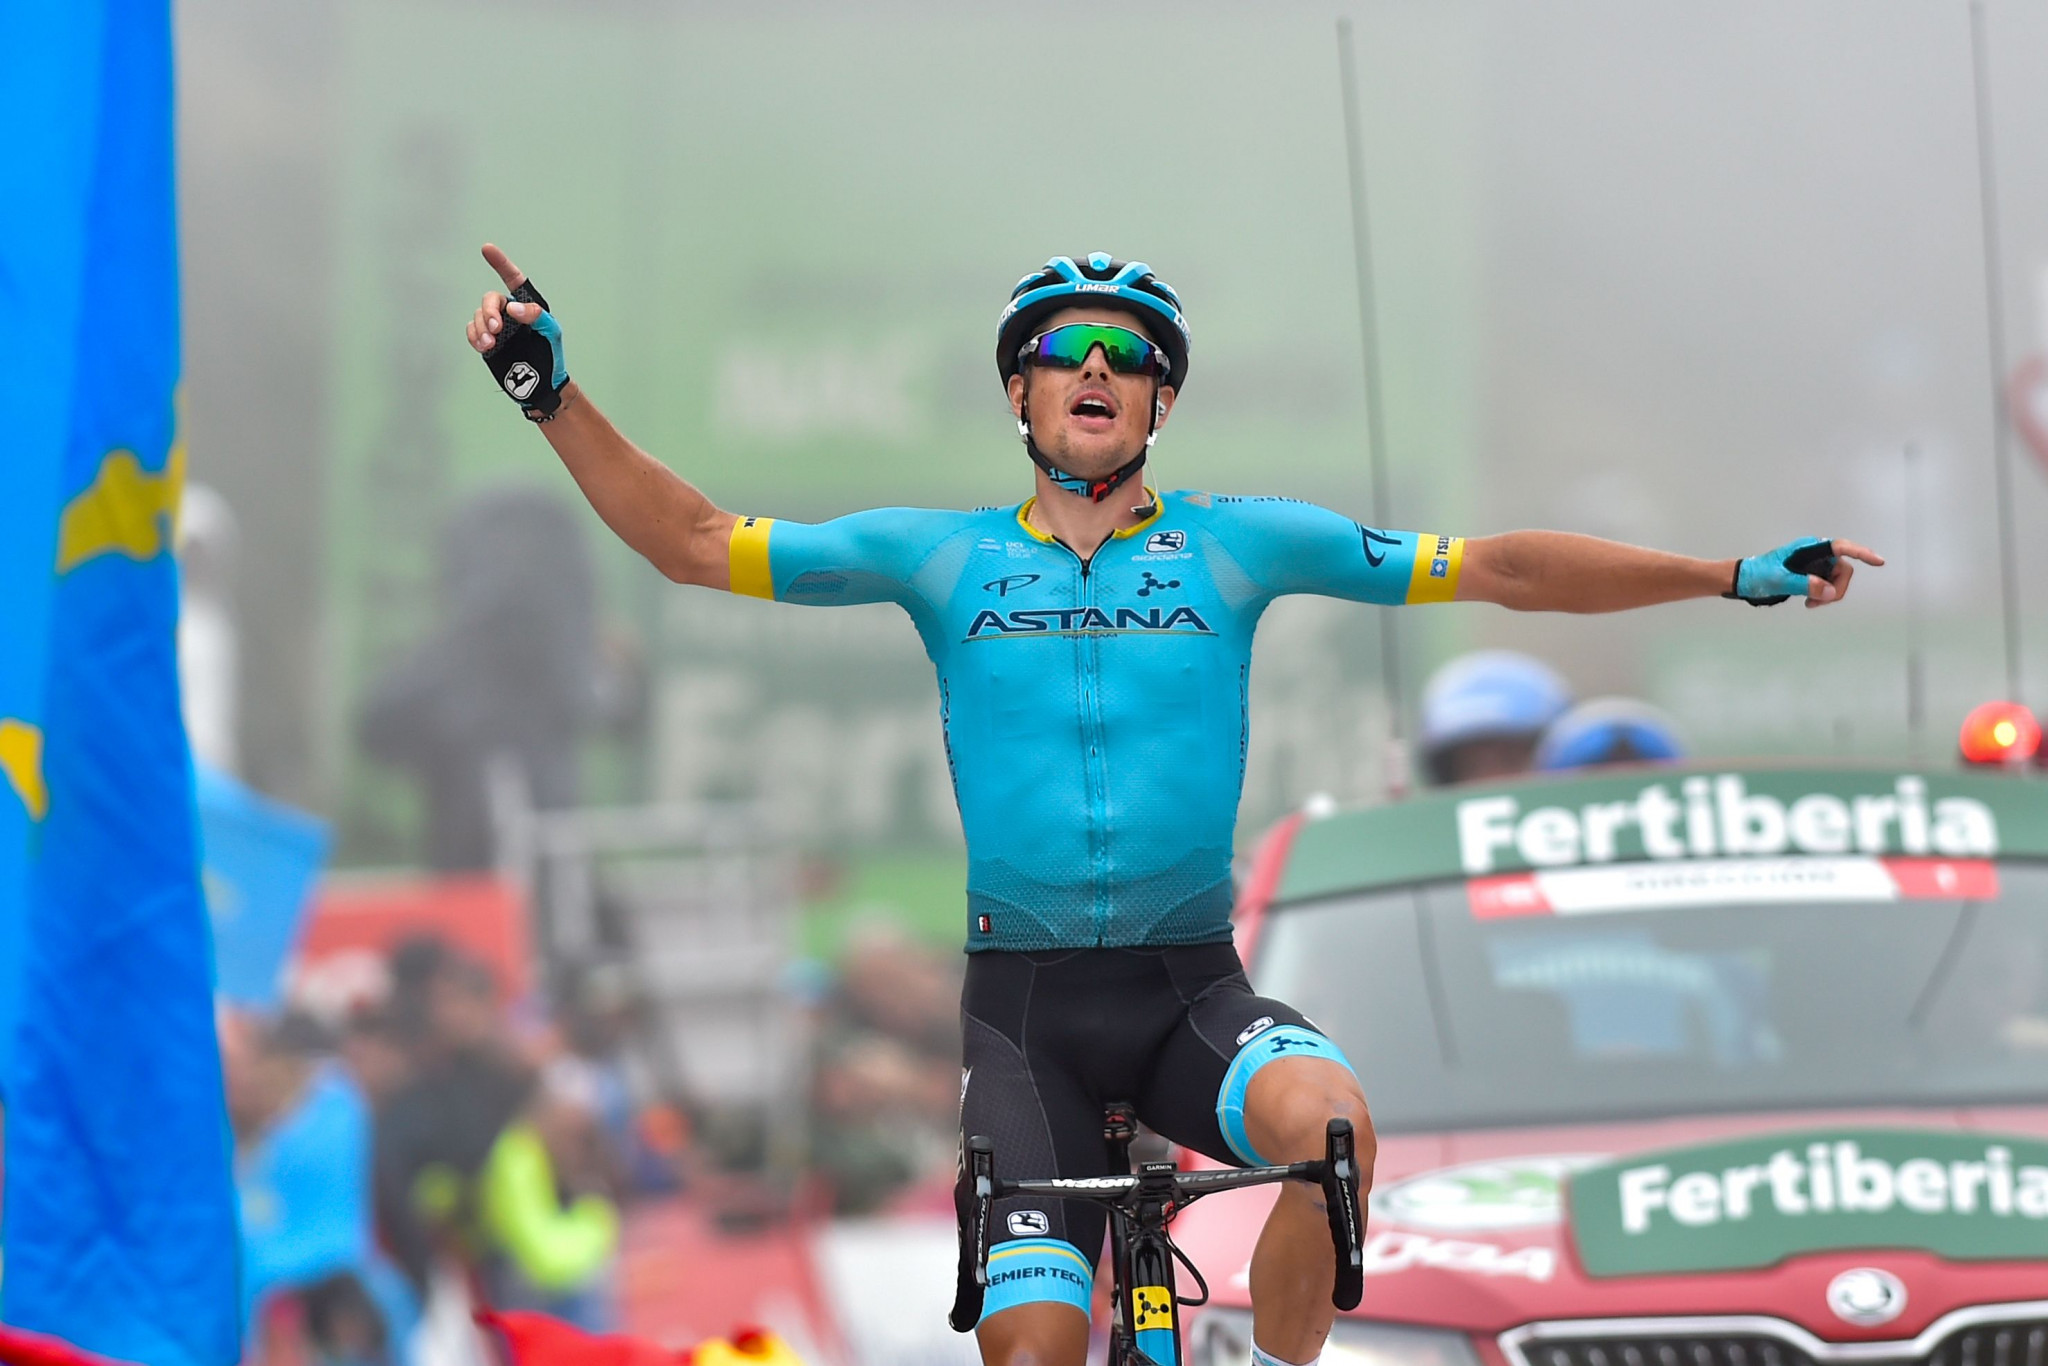 Danish rider Jakob Fuglsang won stage 16 of the Vuelta a España ©Getty Images